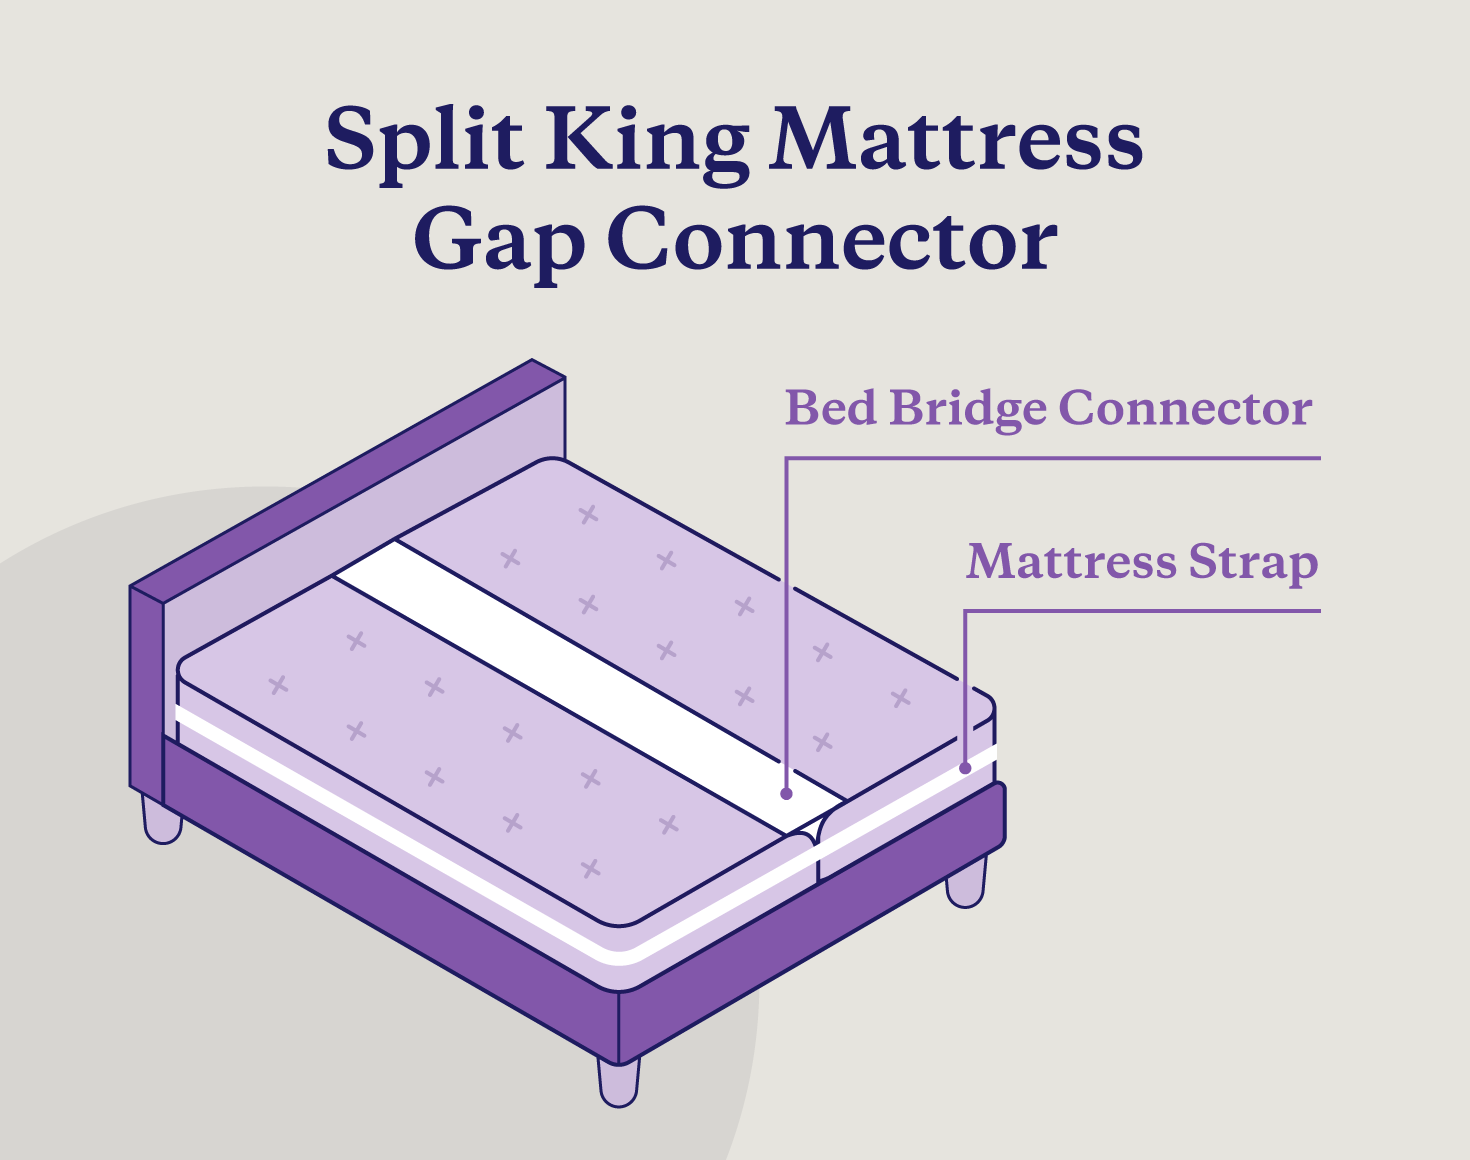 Illustration of a split king gap connector with straps.